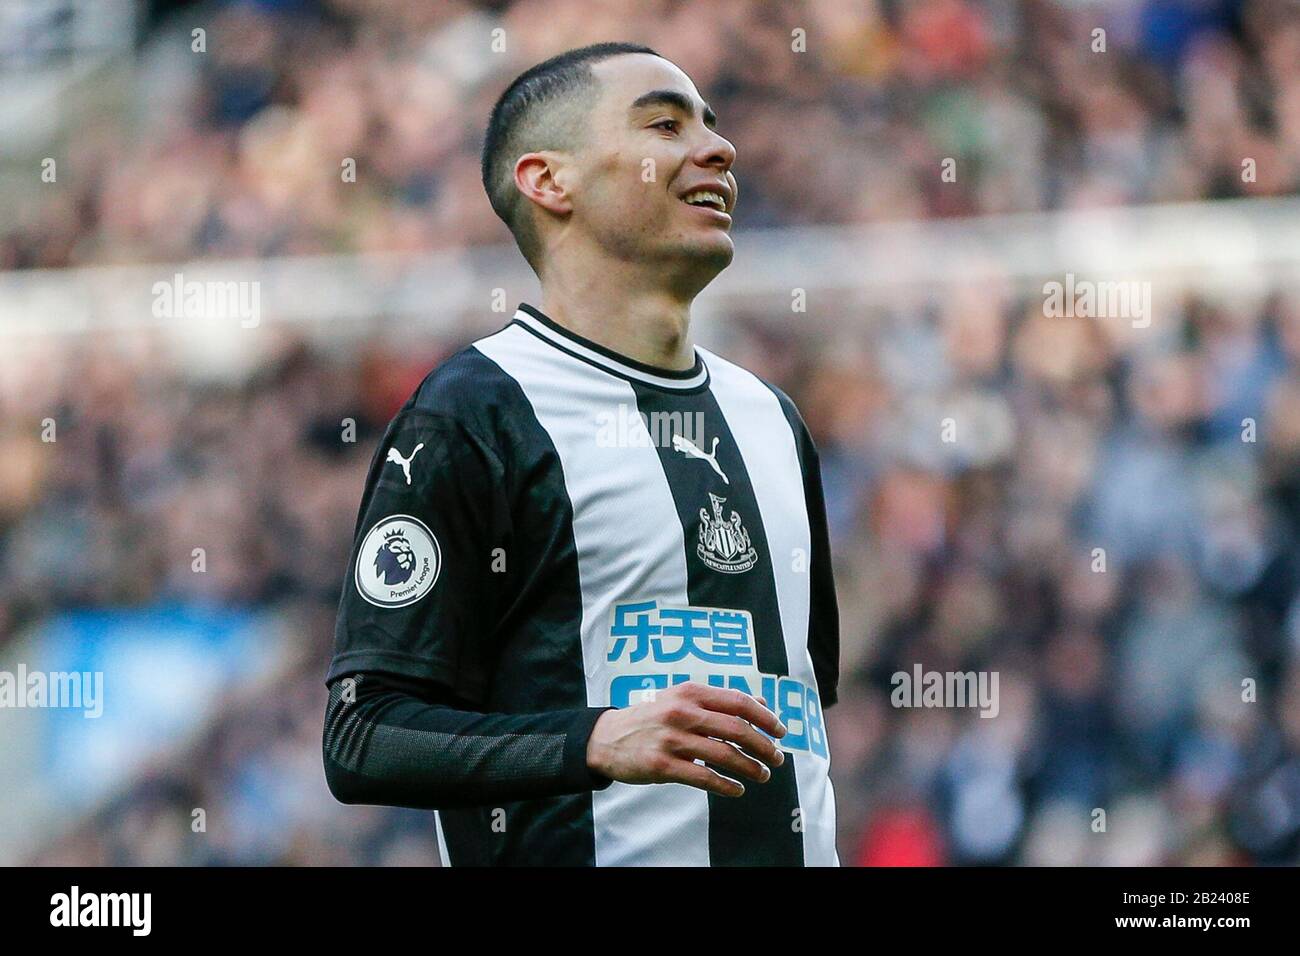 NEWCASTLE UPON TYNE, ENGLAND - FEBRUARY 29TH Miguel Almir-n (24) of Newcastle United during the Premier League match between Newcastle United and Burnley at St. James's Park, Newcastle on Saturday 29th February 2020. (Credit: Iam Burn | MI News) Photograph may only be used for newspaper and/or magazine editorial purposes, license required for commercial use Credit: MI News & Sport /Alamy Live News Stock Photo